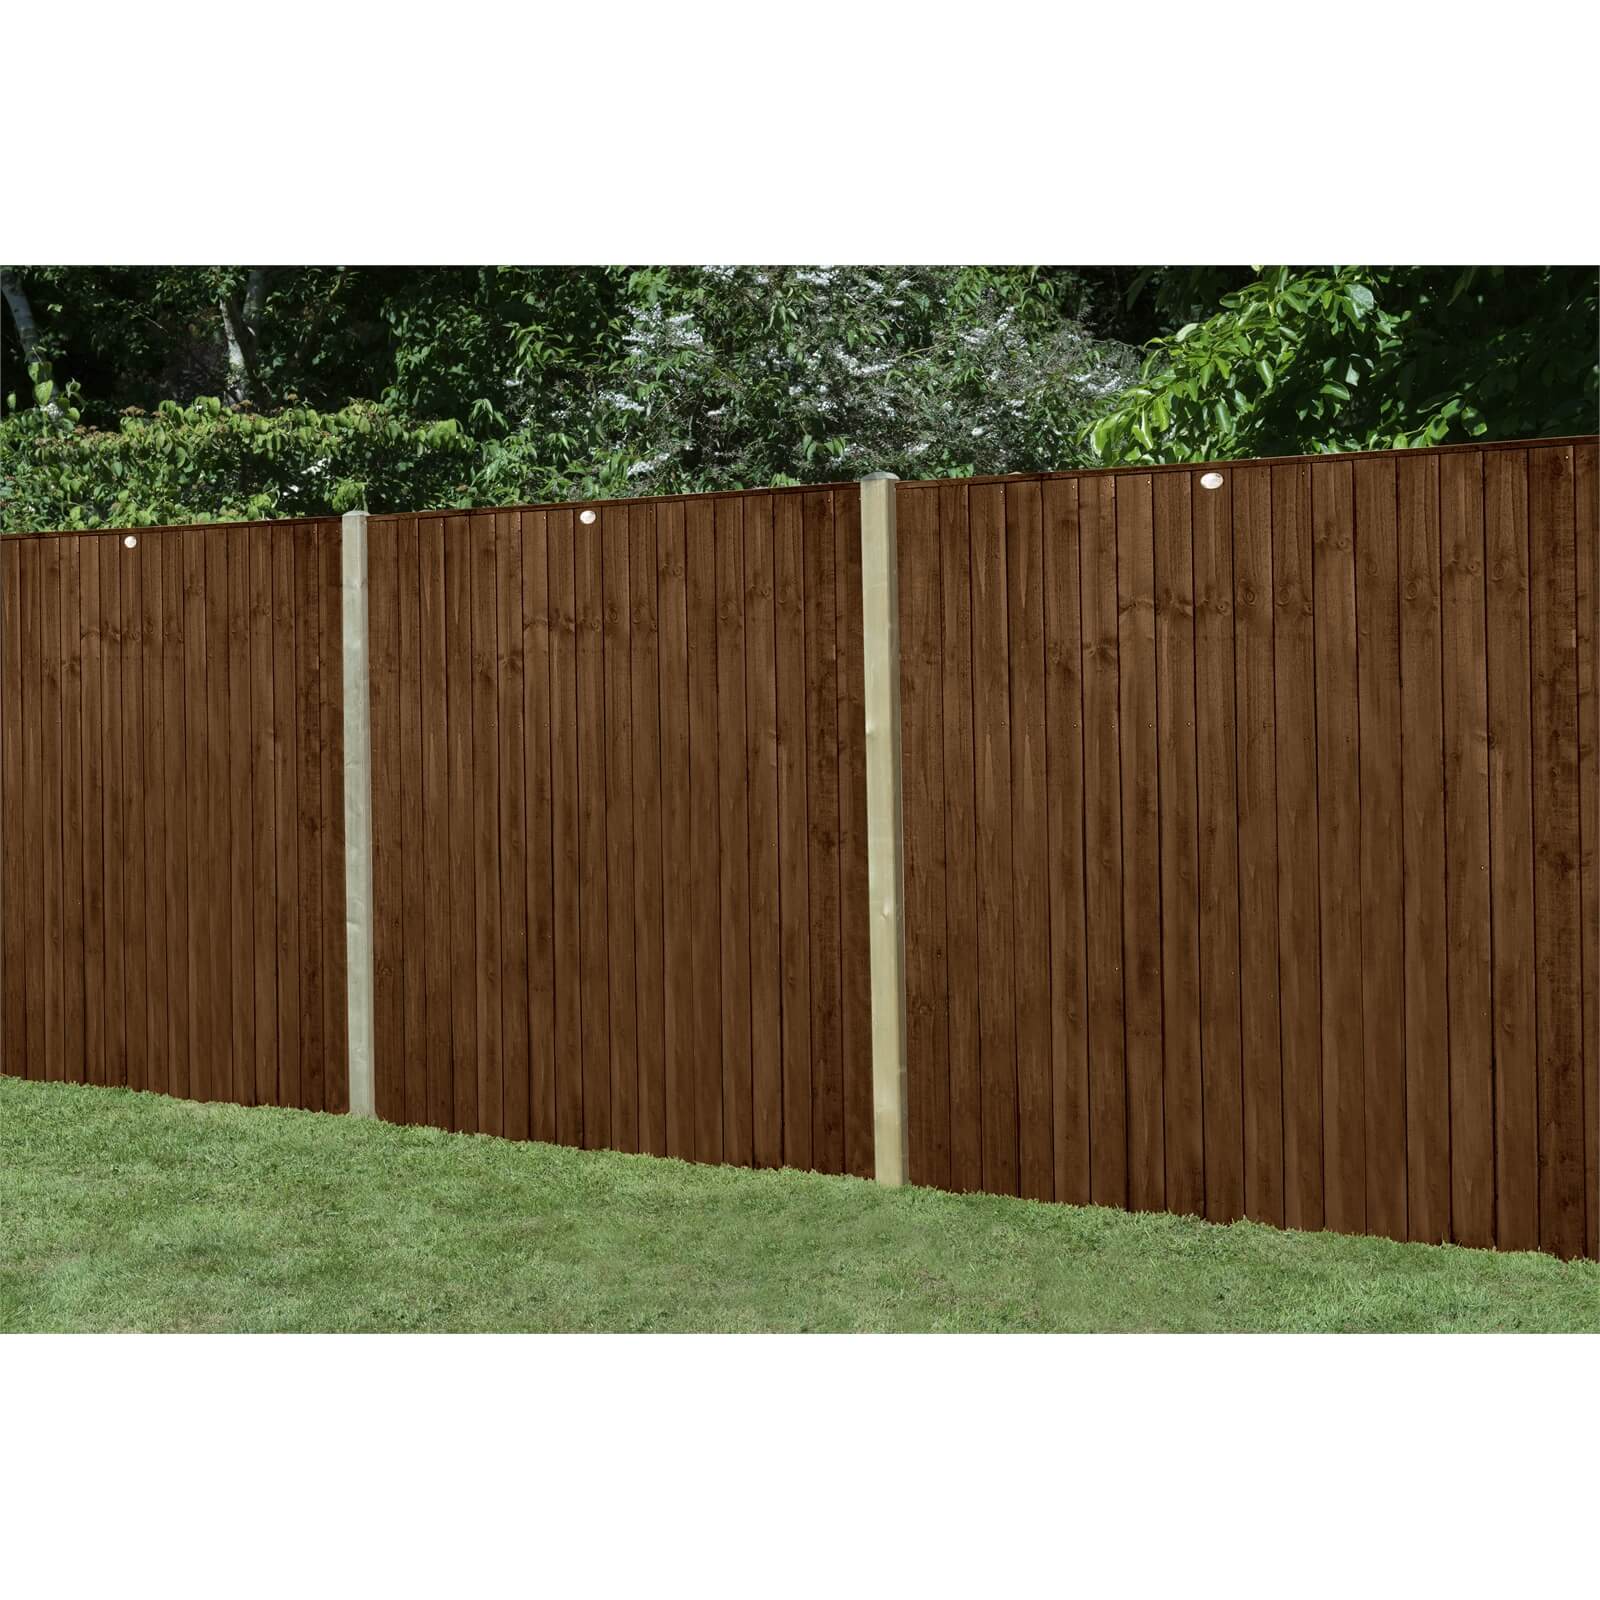 6ft x 5ft (1.83m x 1.54m) Pressure Treated Featheredge Fence Panel (Dark Brown) - Pack of 5